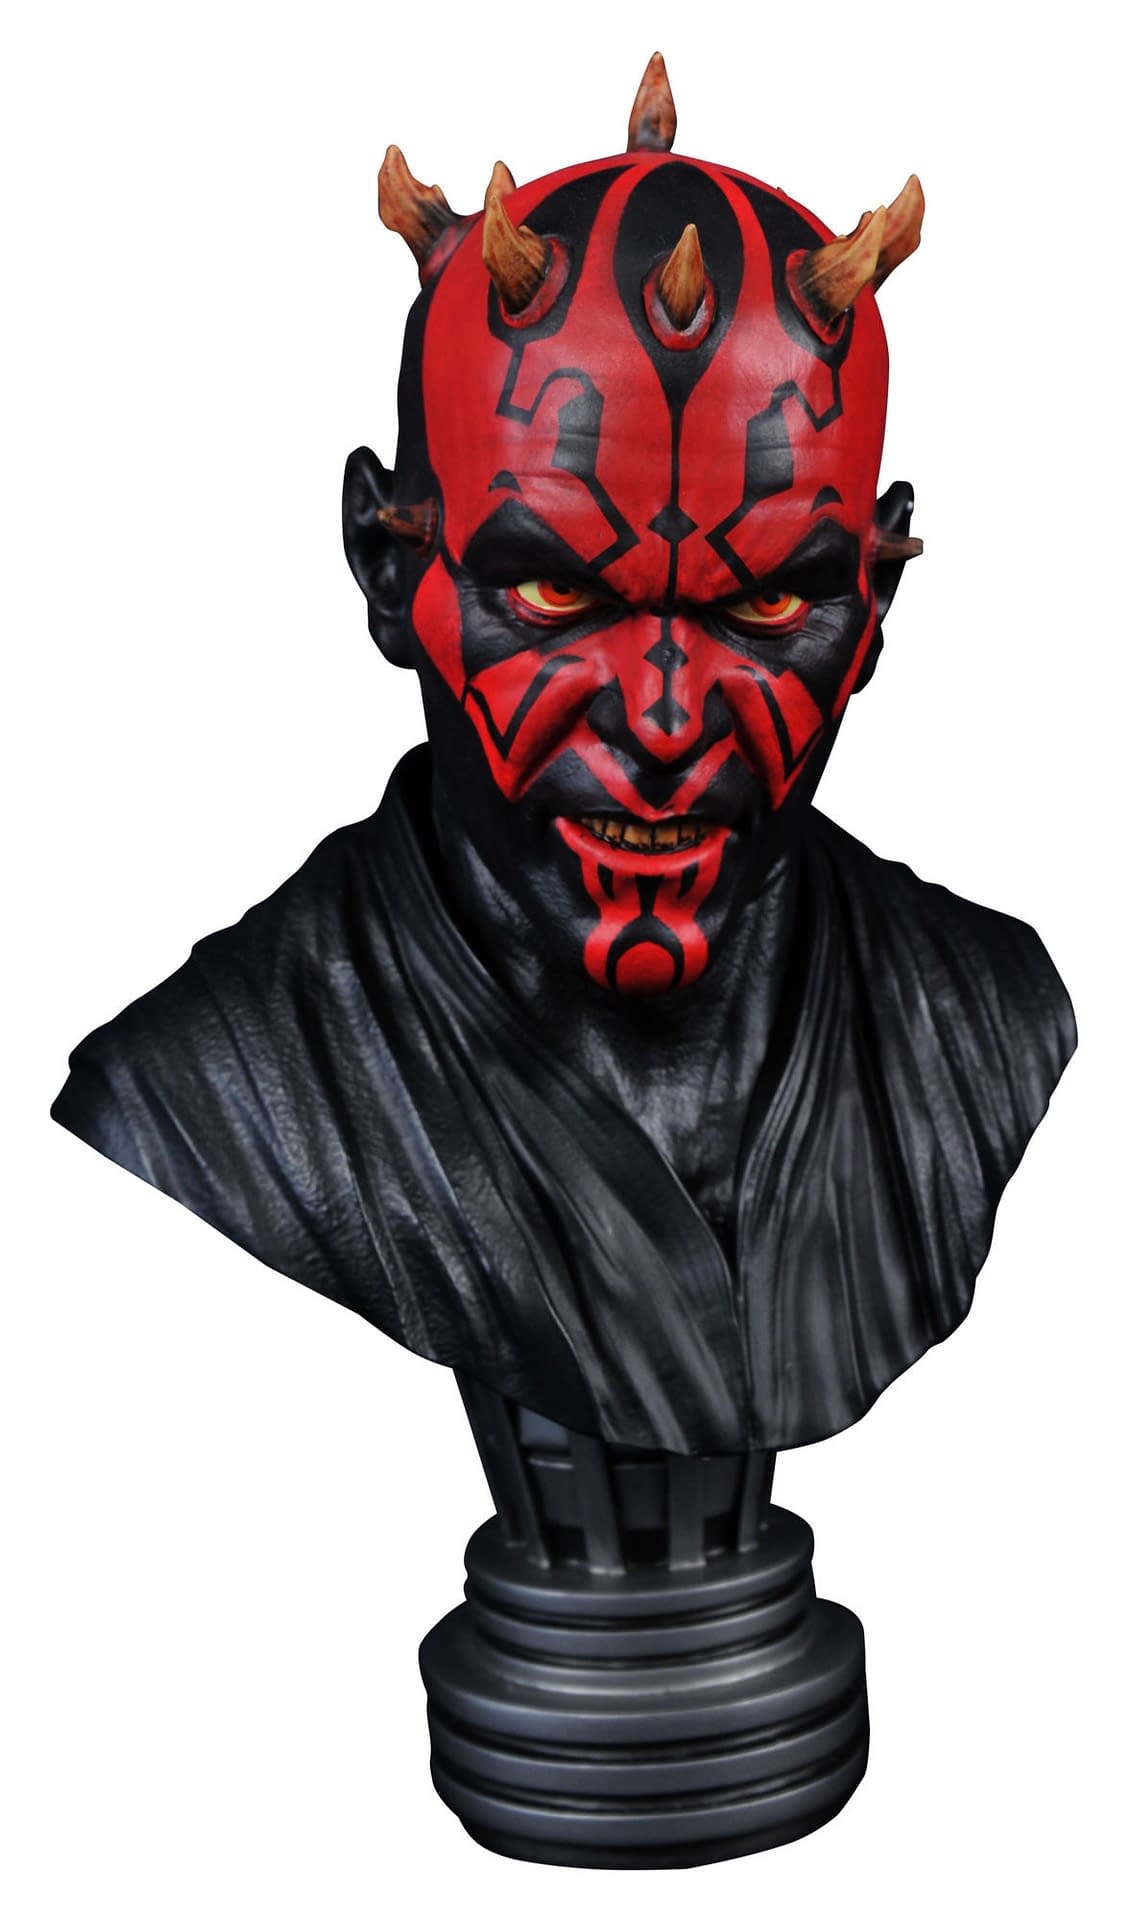 star wars bust collection